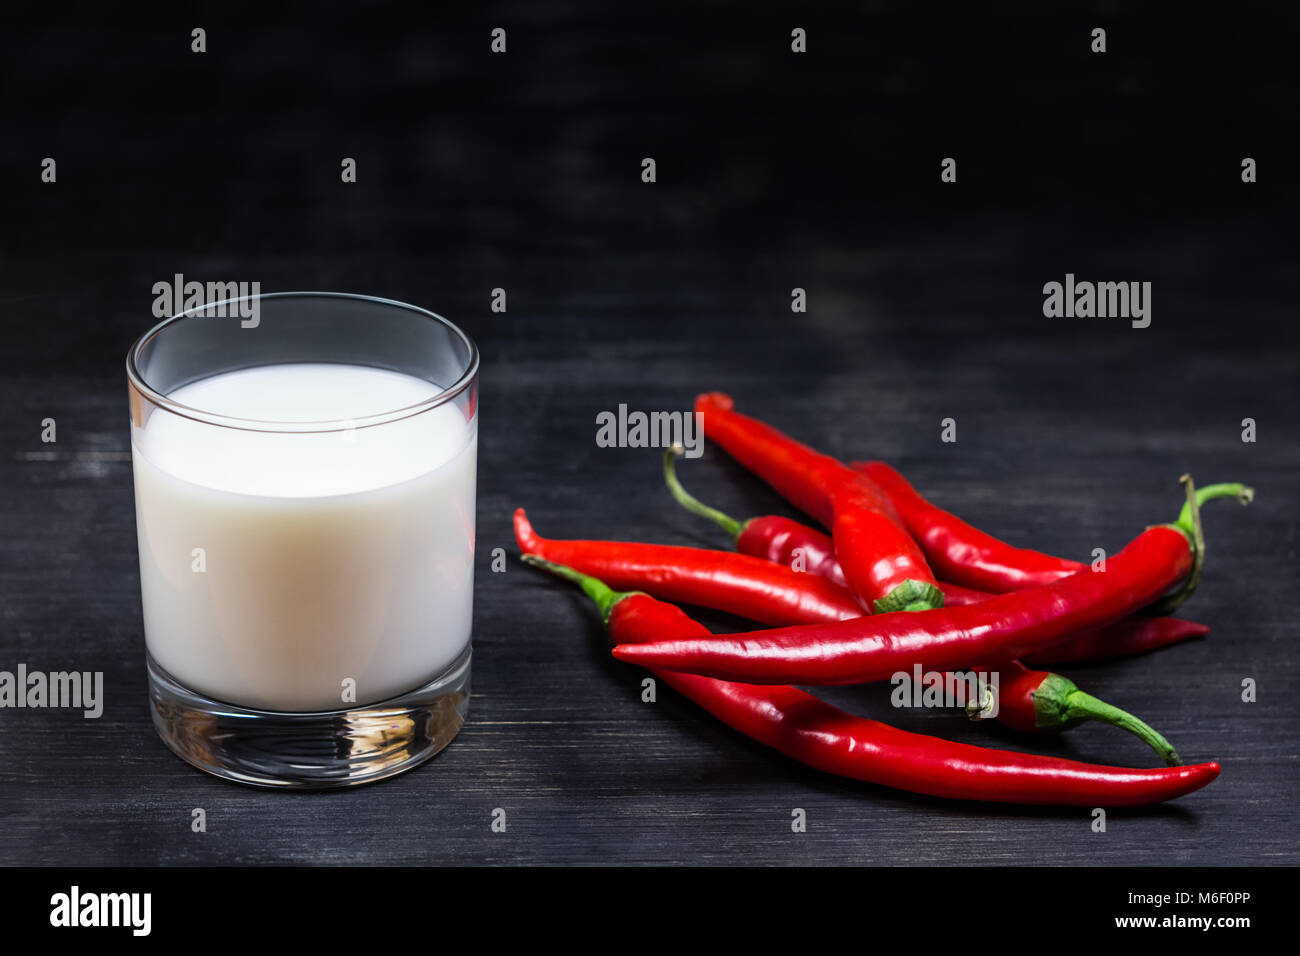 Chili peppers and milk on black background Stock Photo